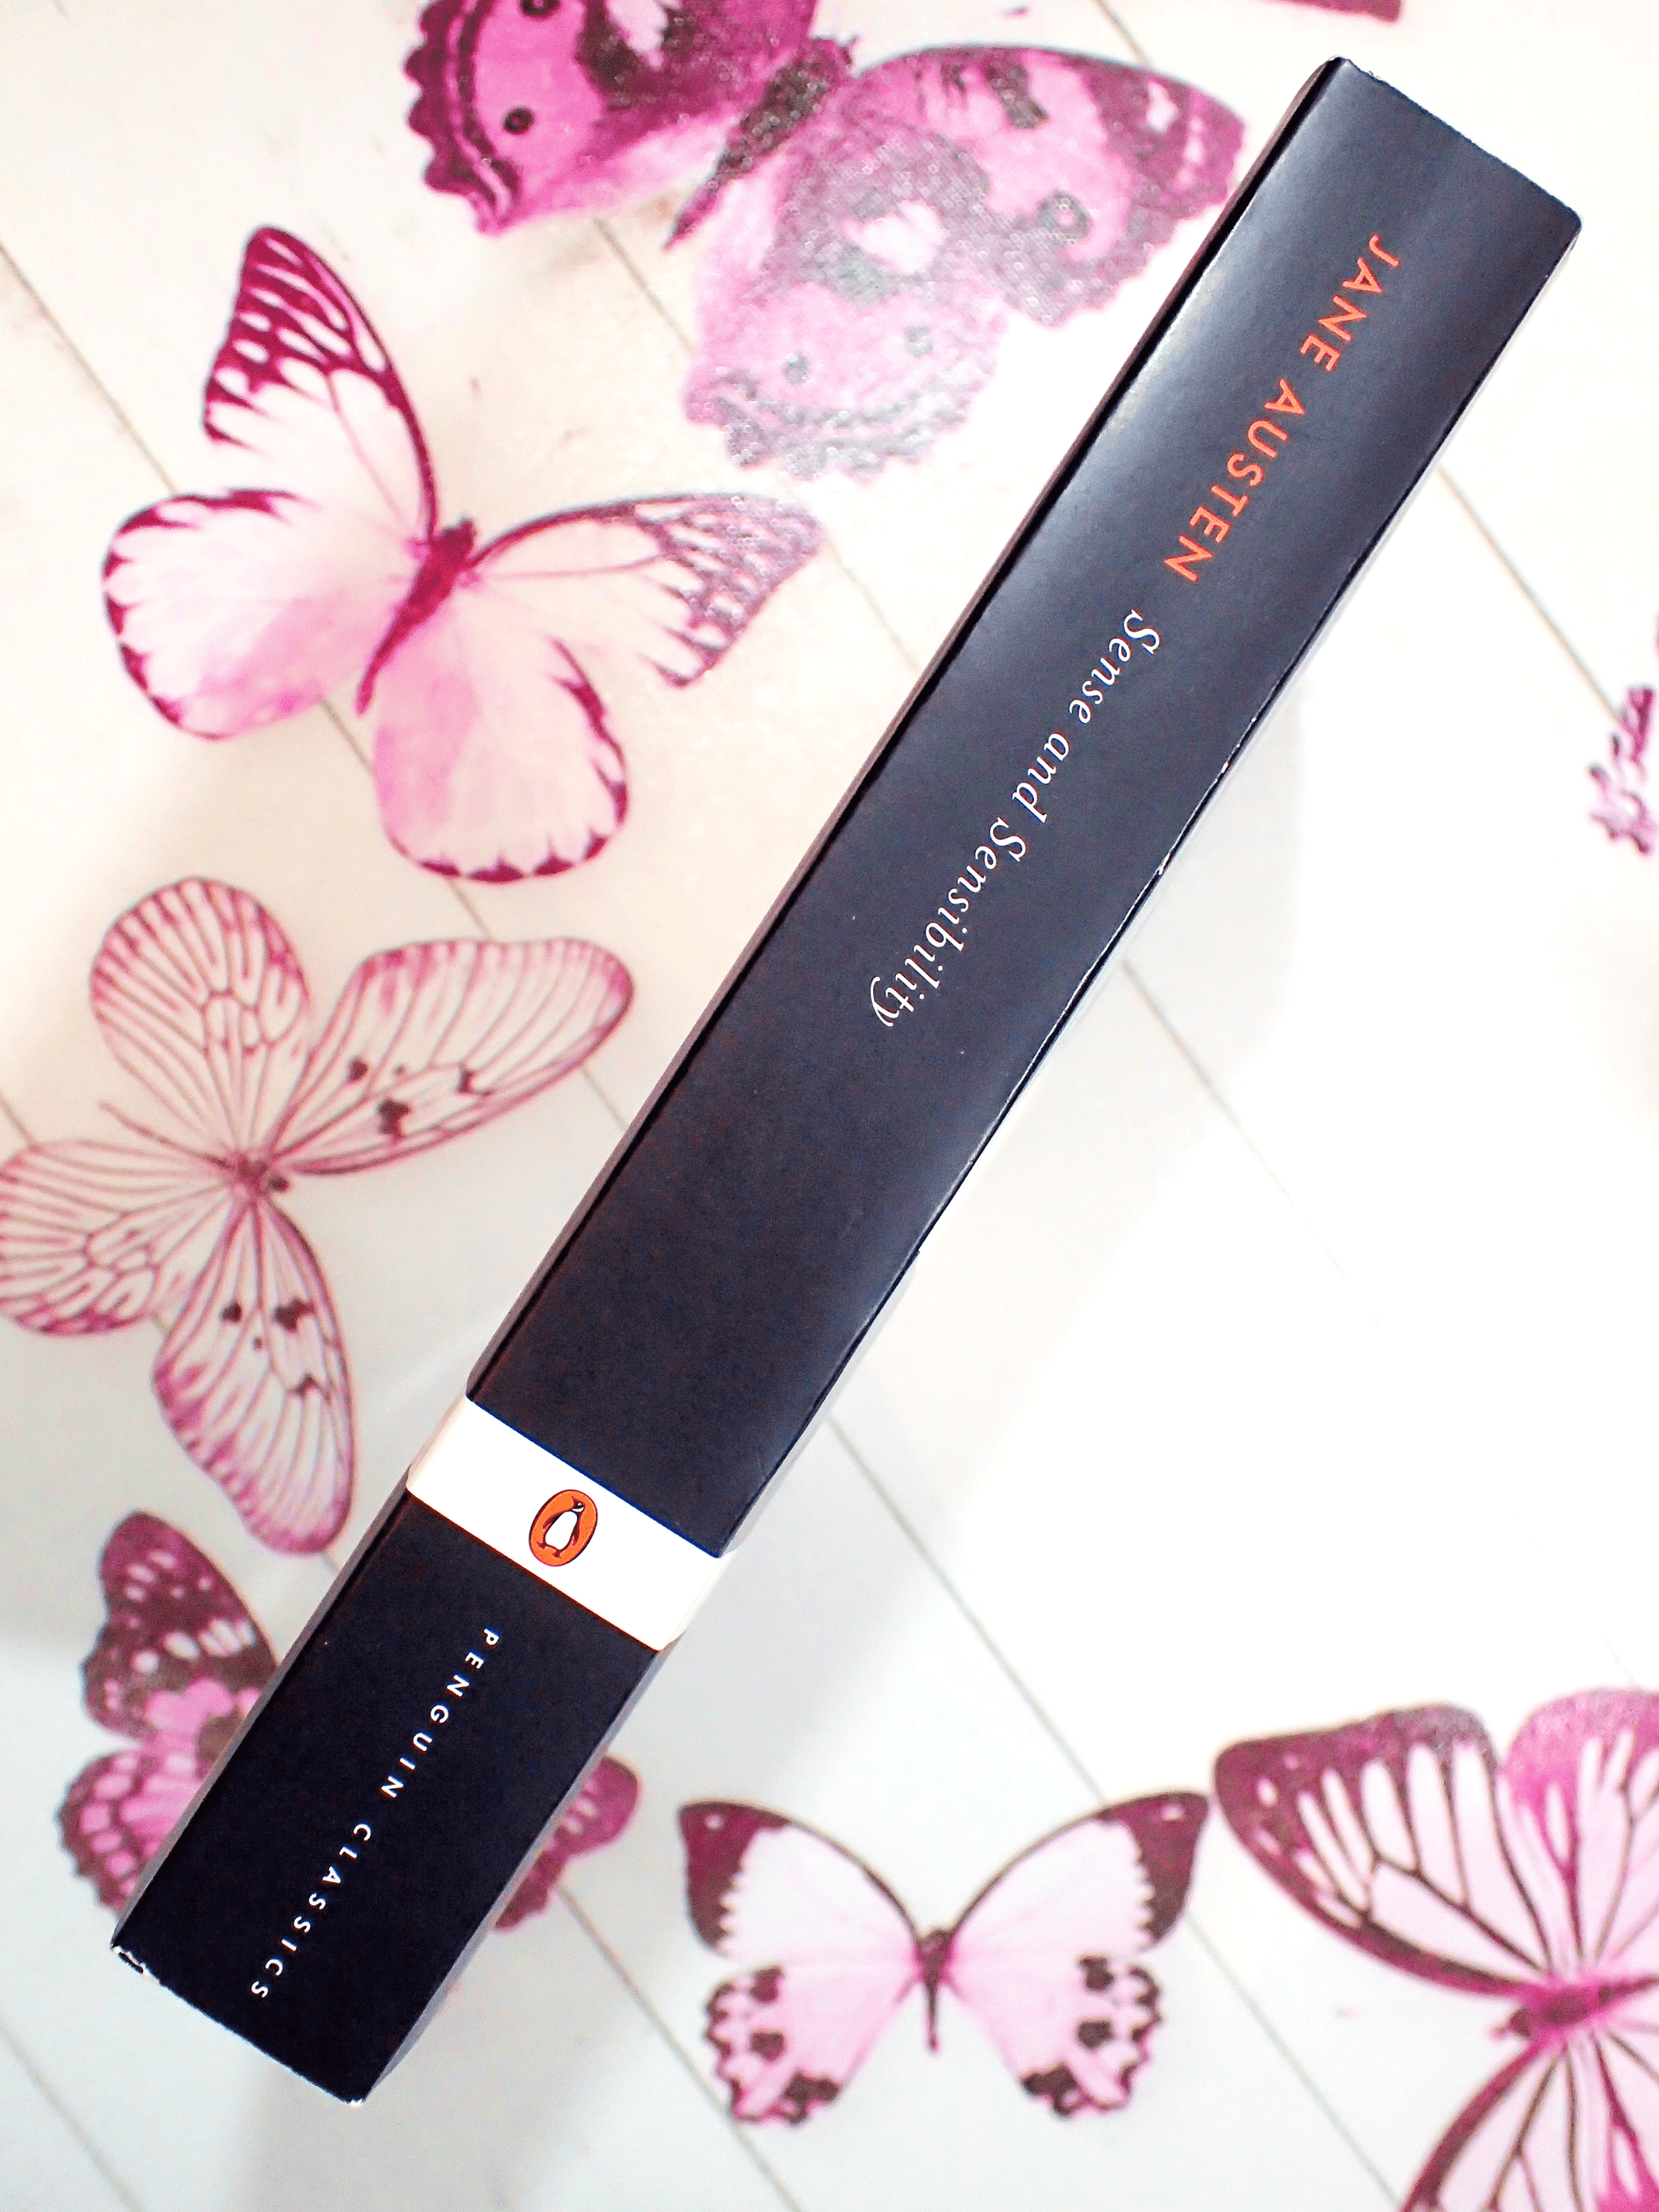 Spine of paperback book Penguin Classics Sense and Sensibility Jane Austen showing orange and white titles against black on a butterfly background. 